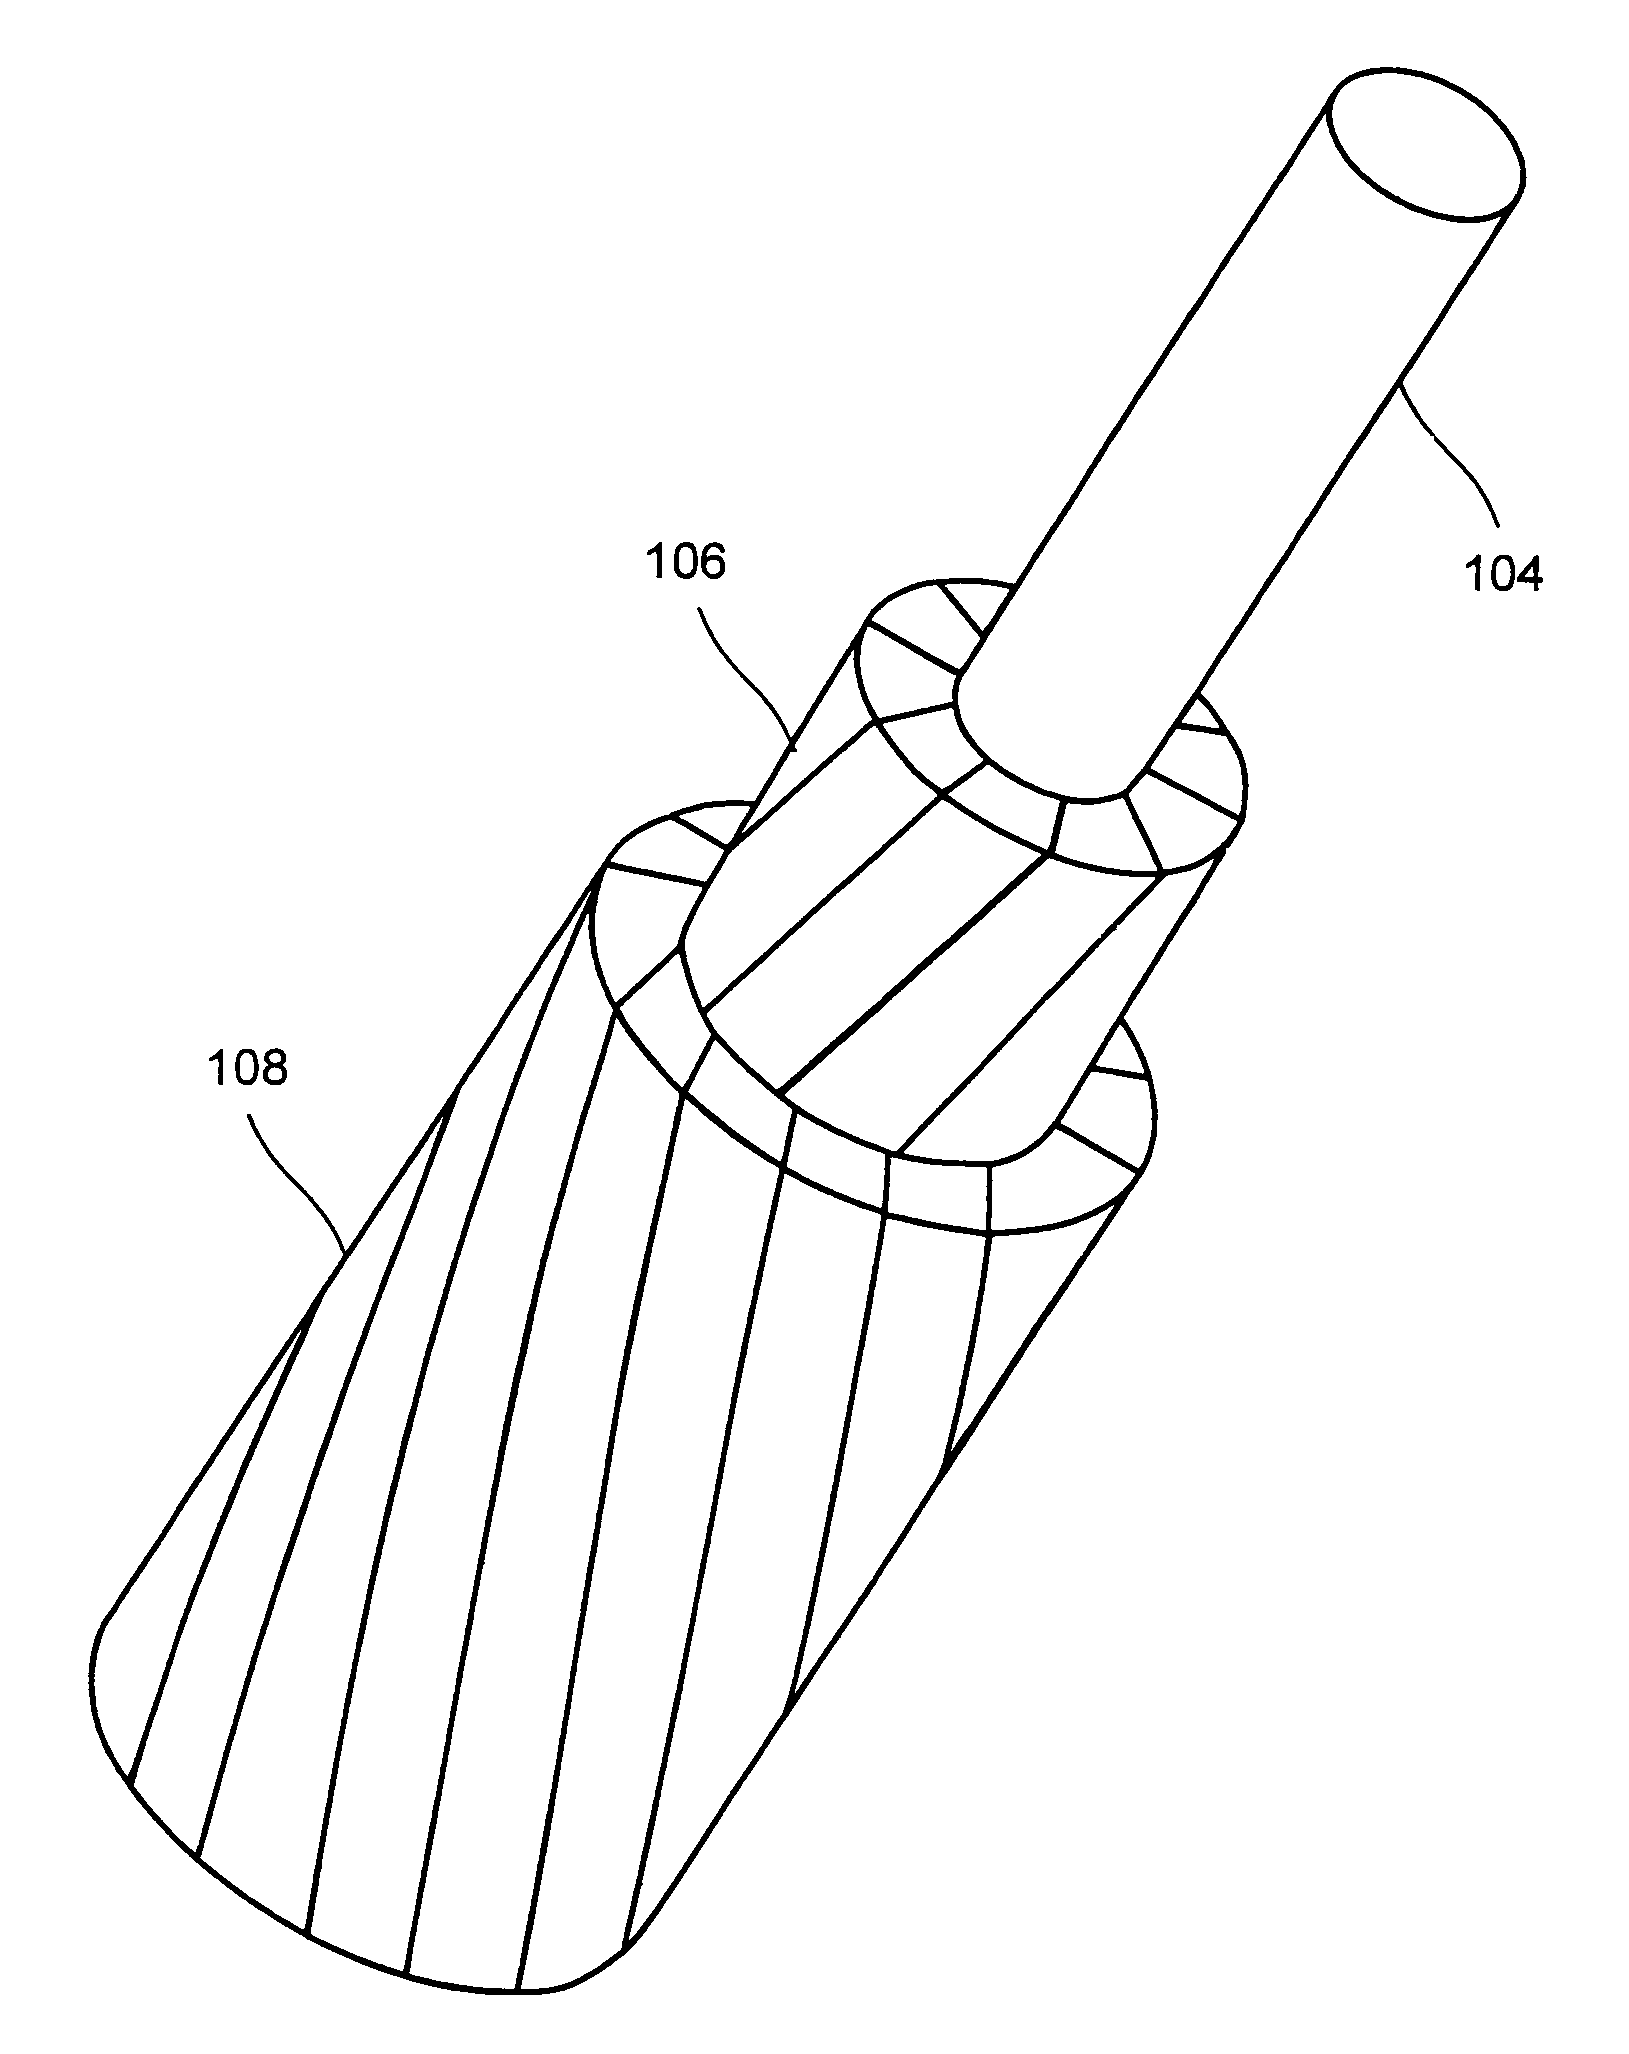 Aluminum conductor composite core reinforced cable and method of manufacture